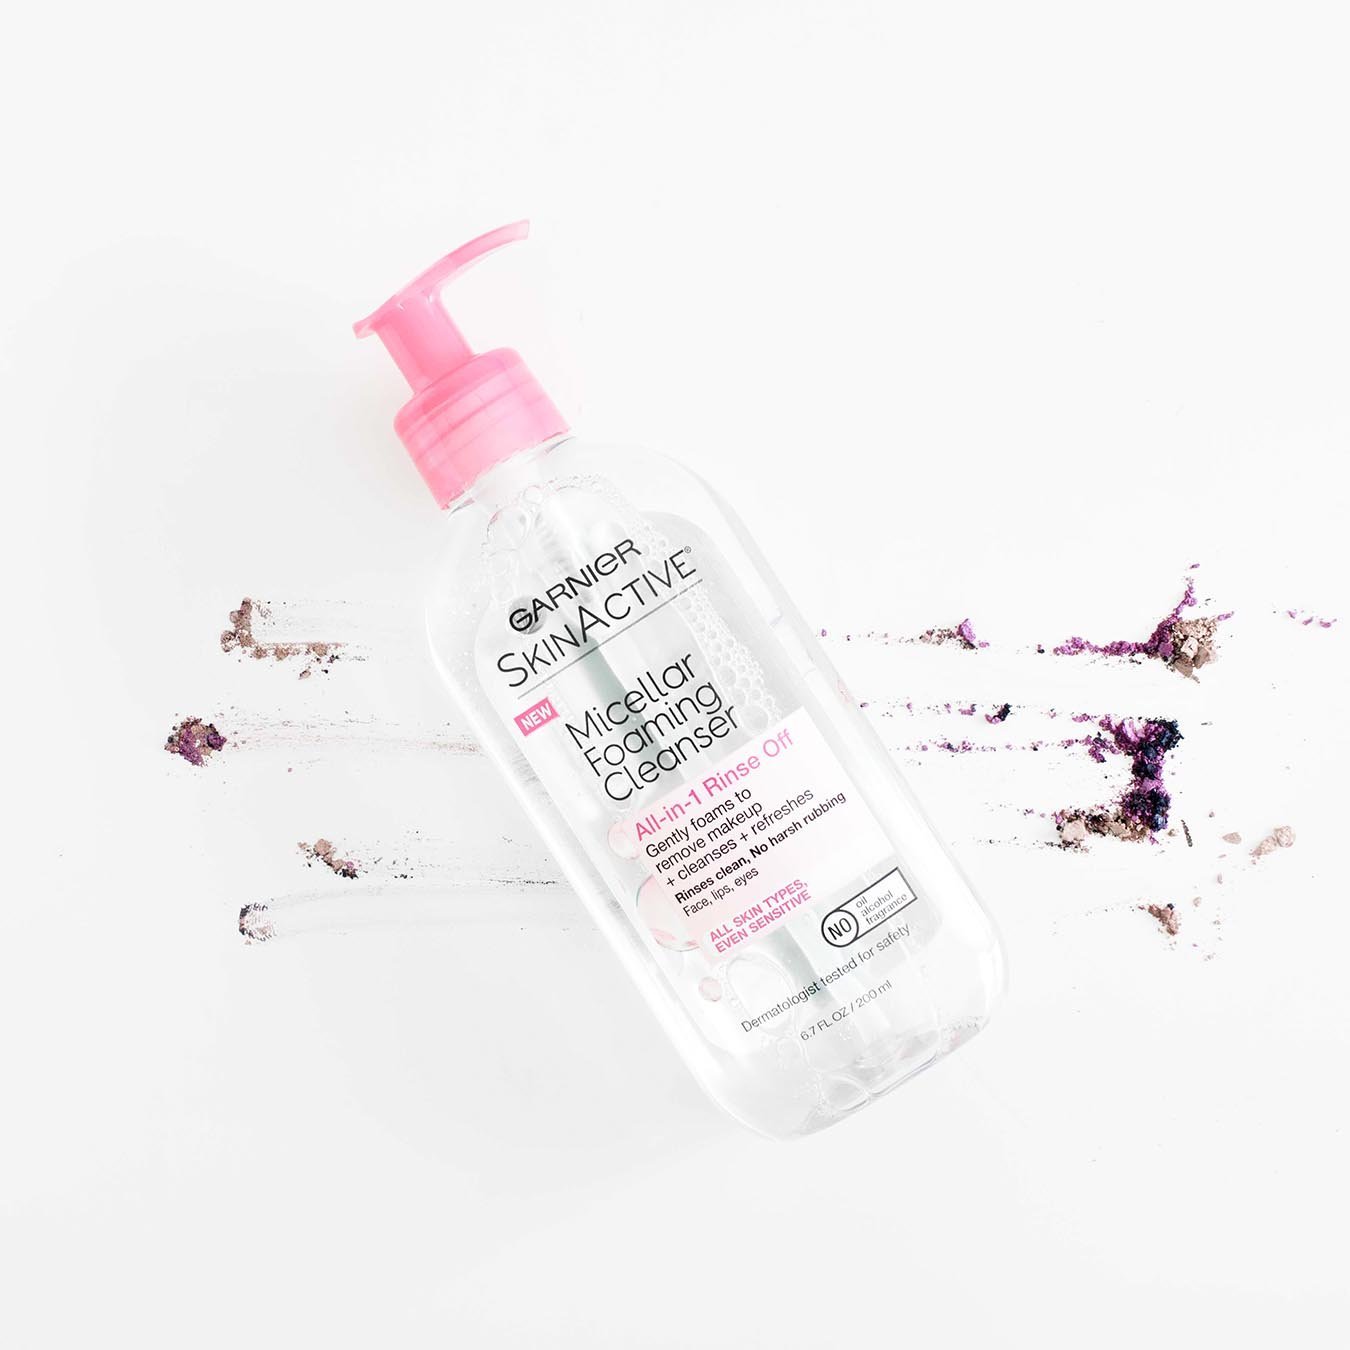 Garnier SkinActive Micellar Foaming Cleanser All-in-1 Rinse Off with pink pump on a white background smudged with tan and purple blush.